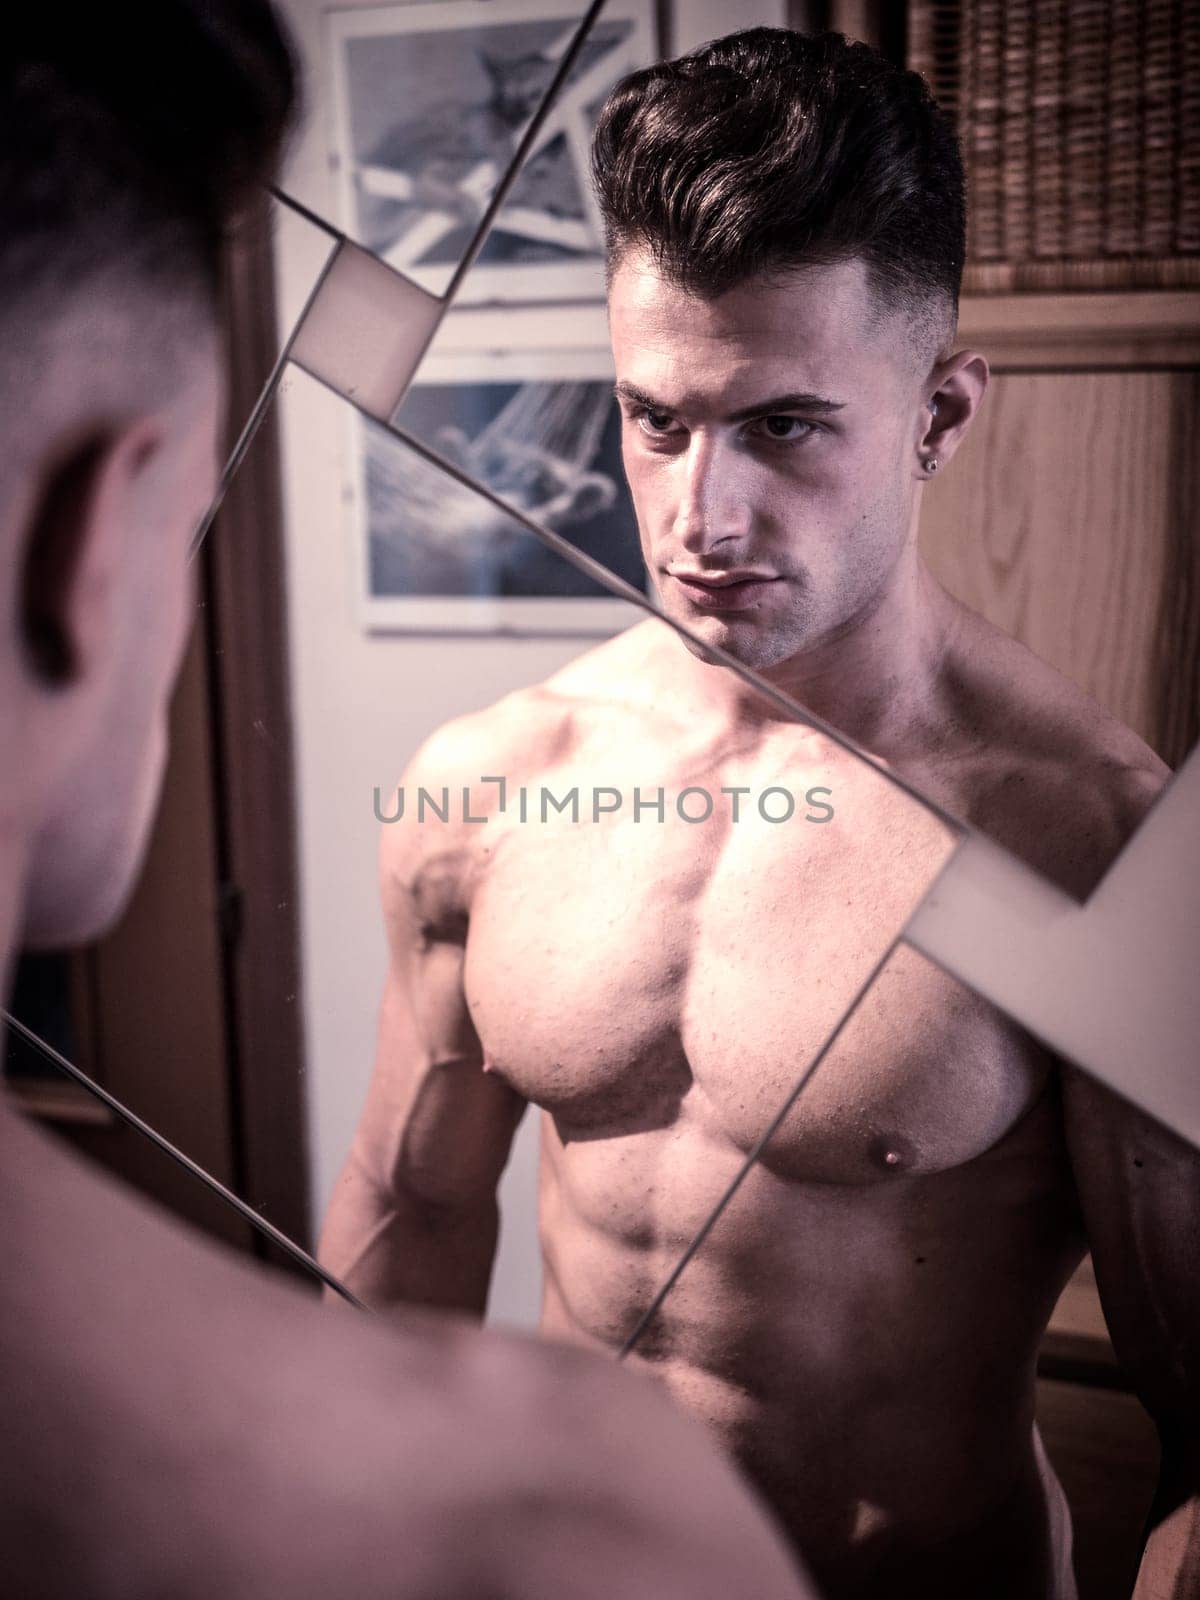 A shirtless muscular man looking at himself in the mirror